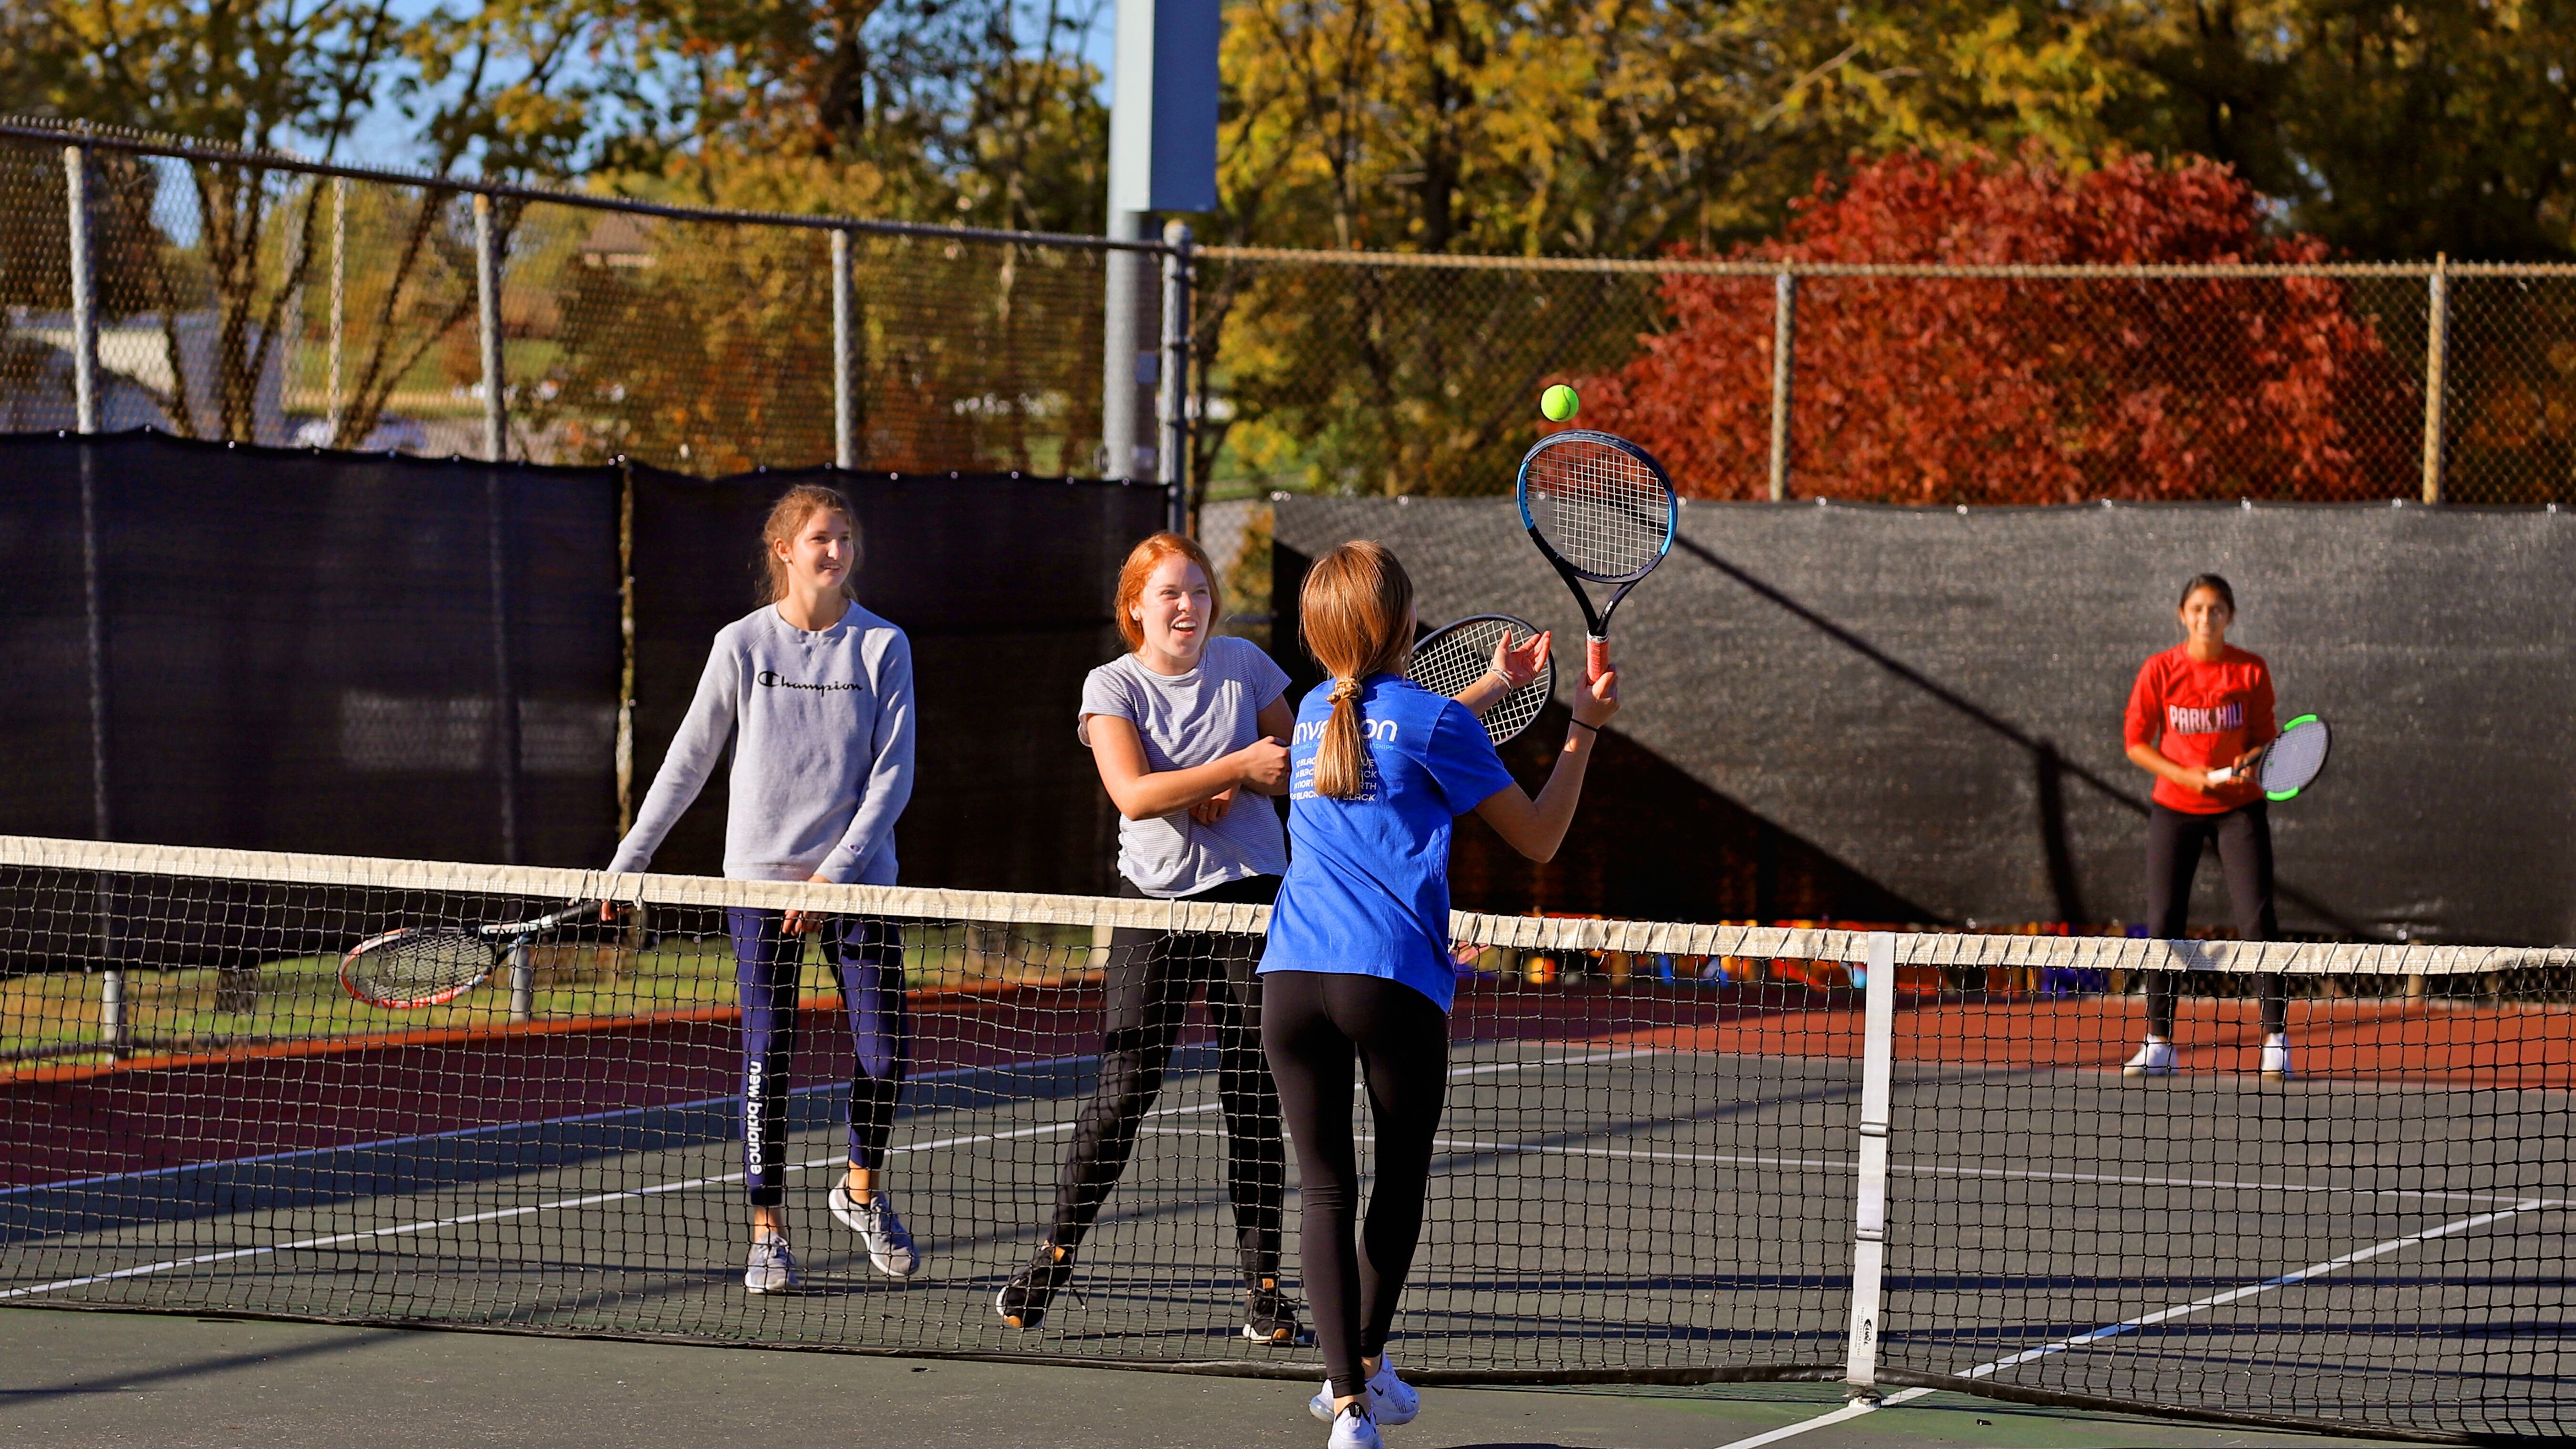 Kids playing tennis in the fall